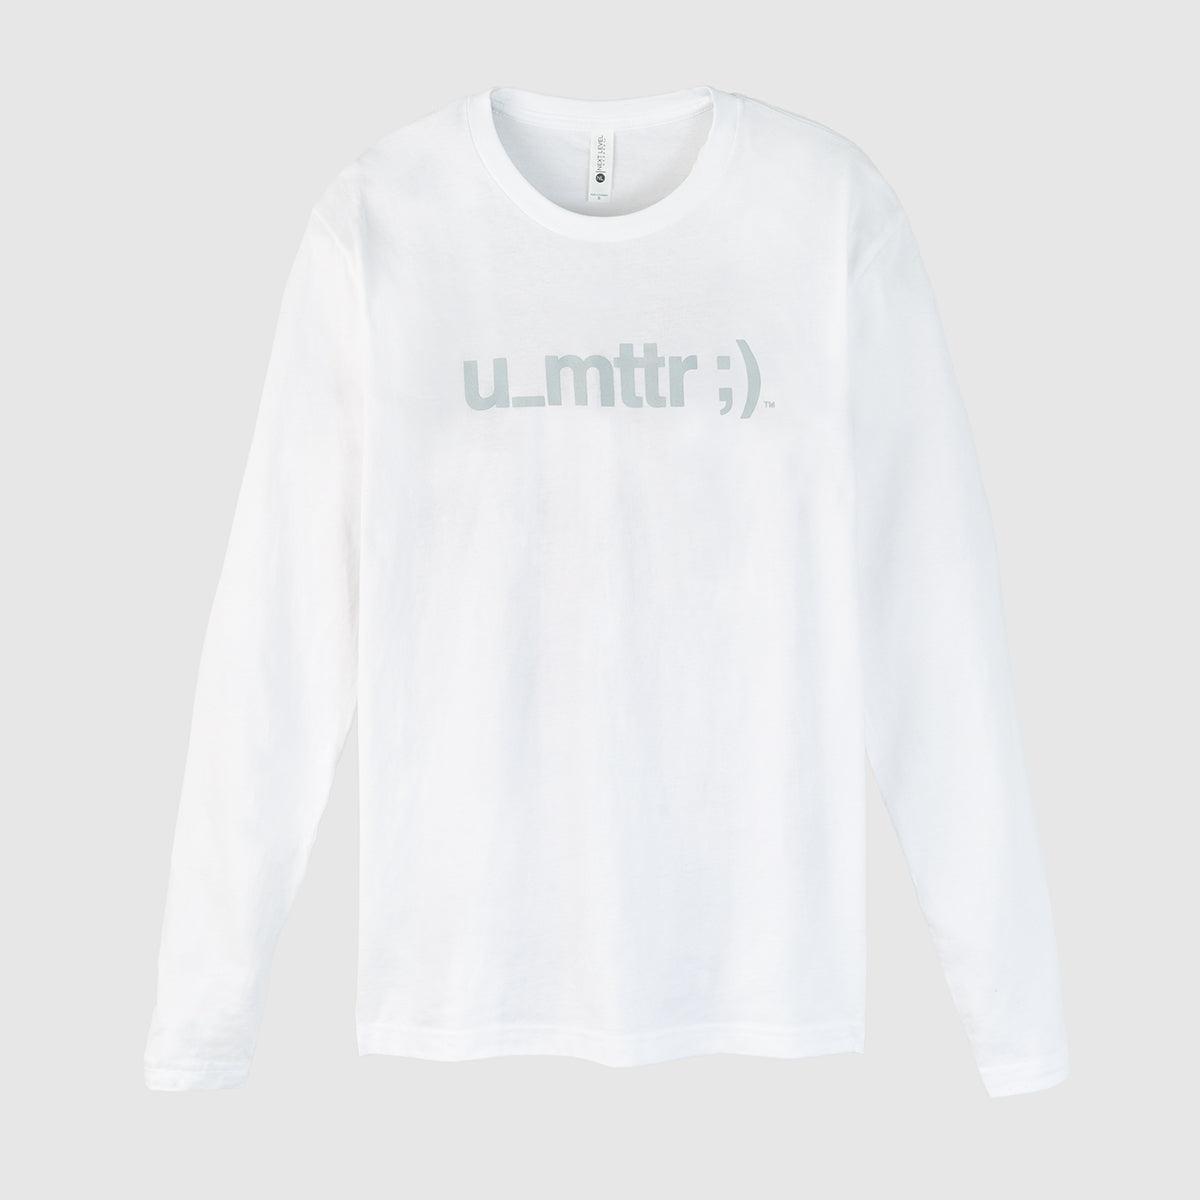 Buy T-shirt Long Поле Чудес White, Price: 185 uah - Red and Dog